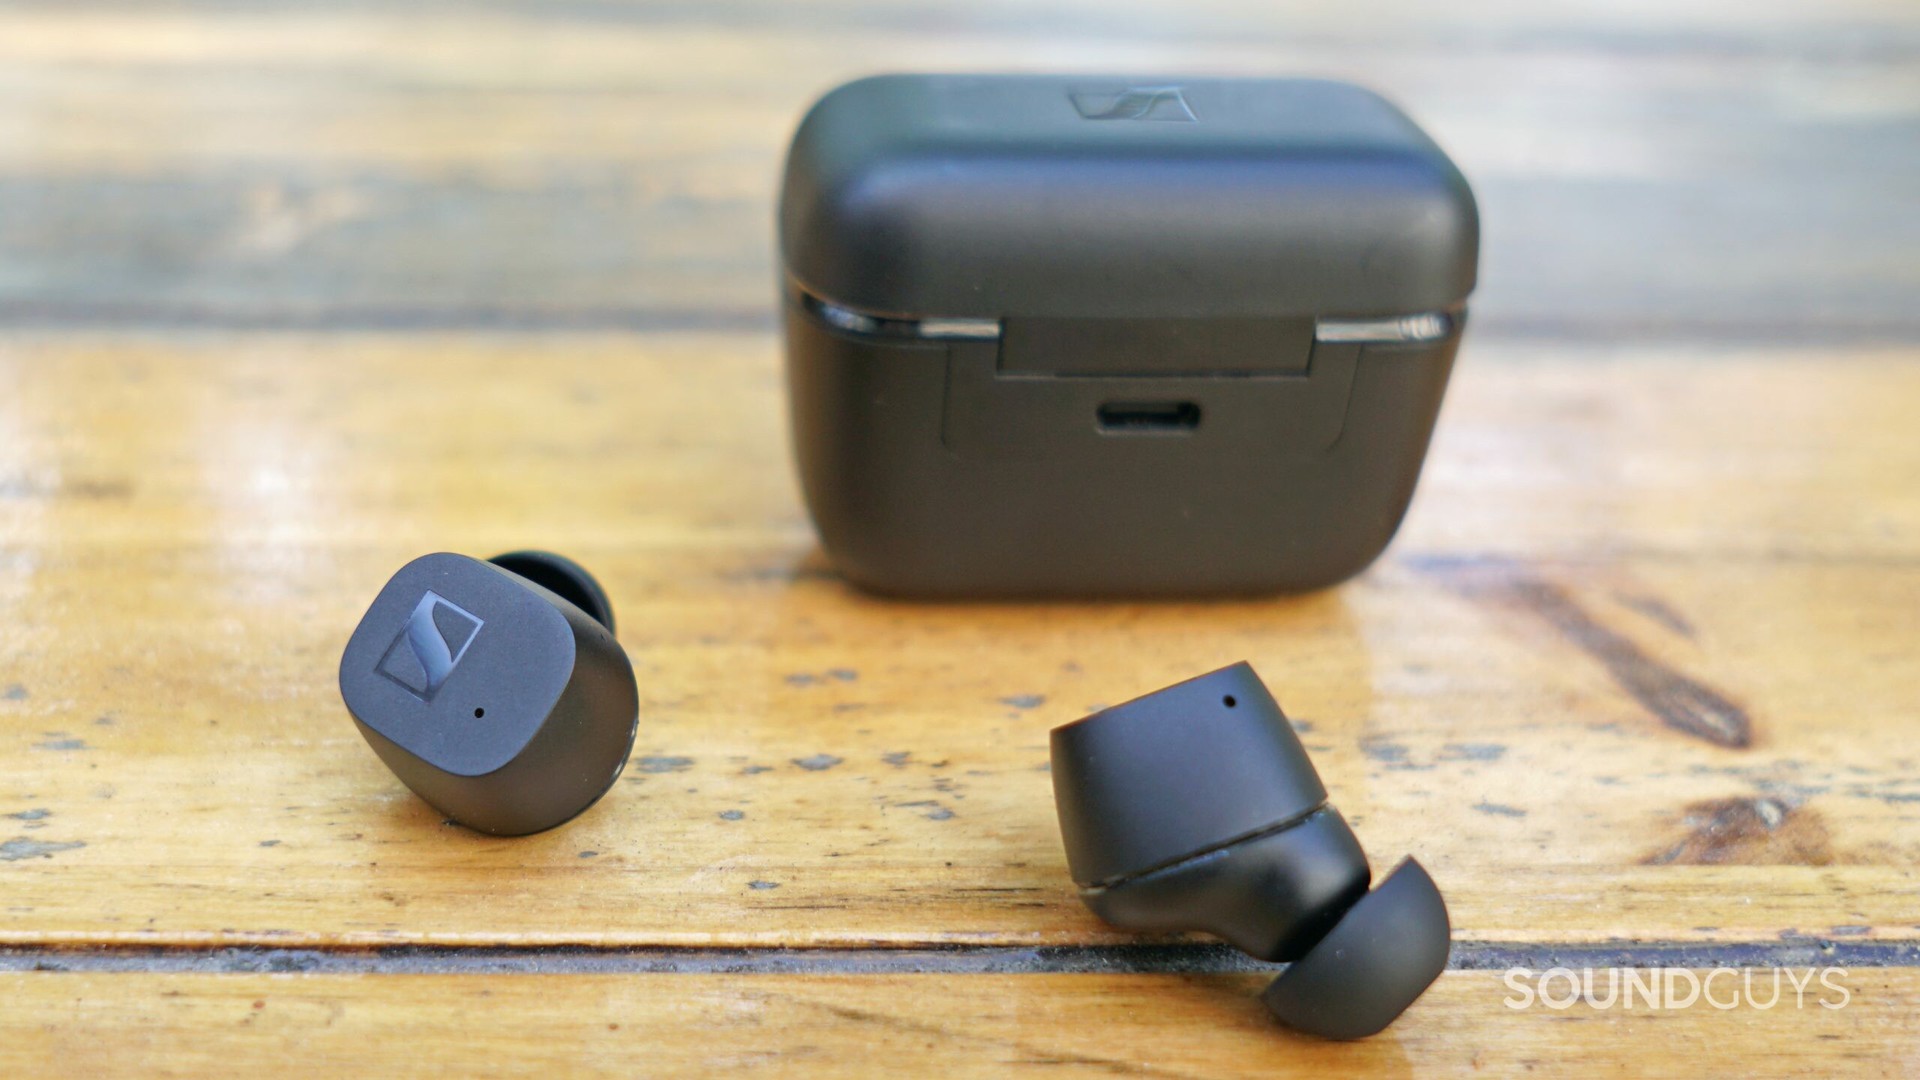 Sennheiser CX True Wireless case and earbuds, showing the charging port on the back of the case.